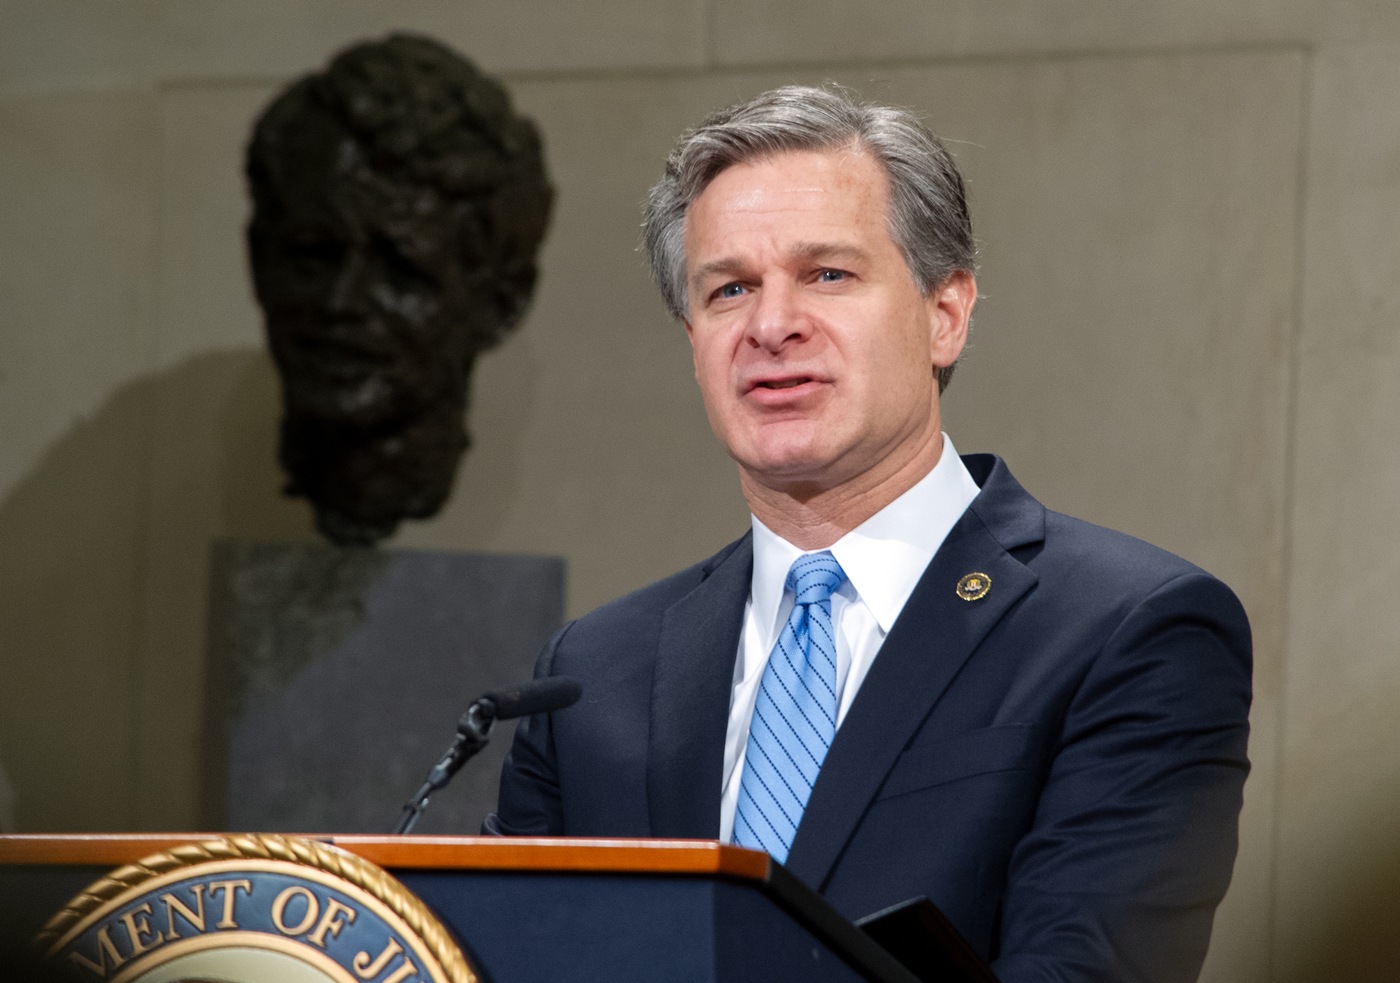 FBI Director Christopher Wray discusses the importance of lawful access